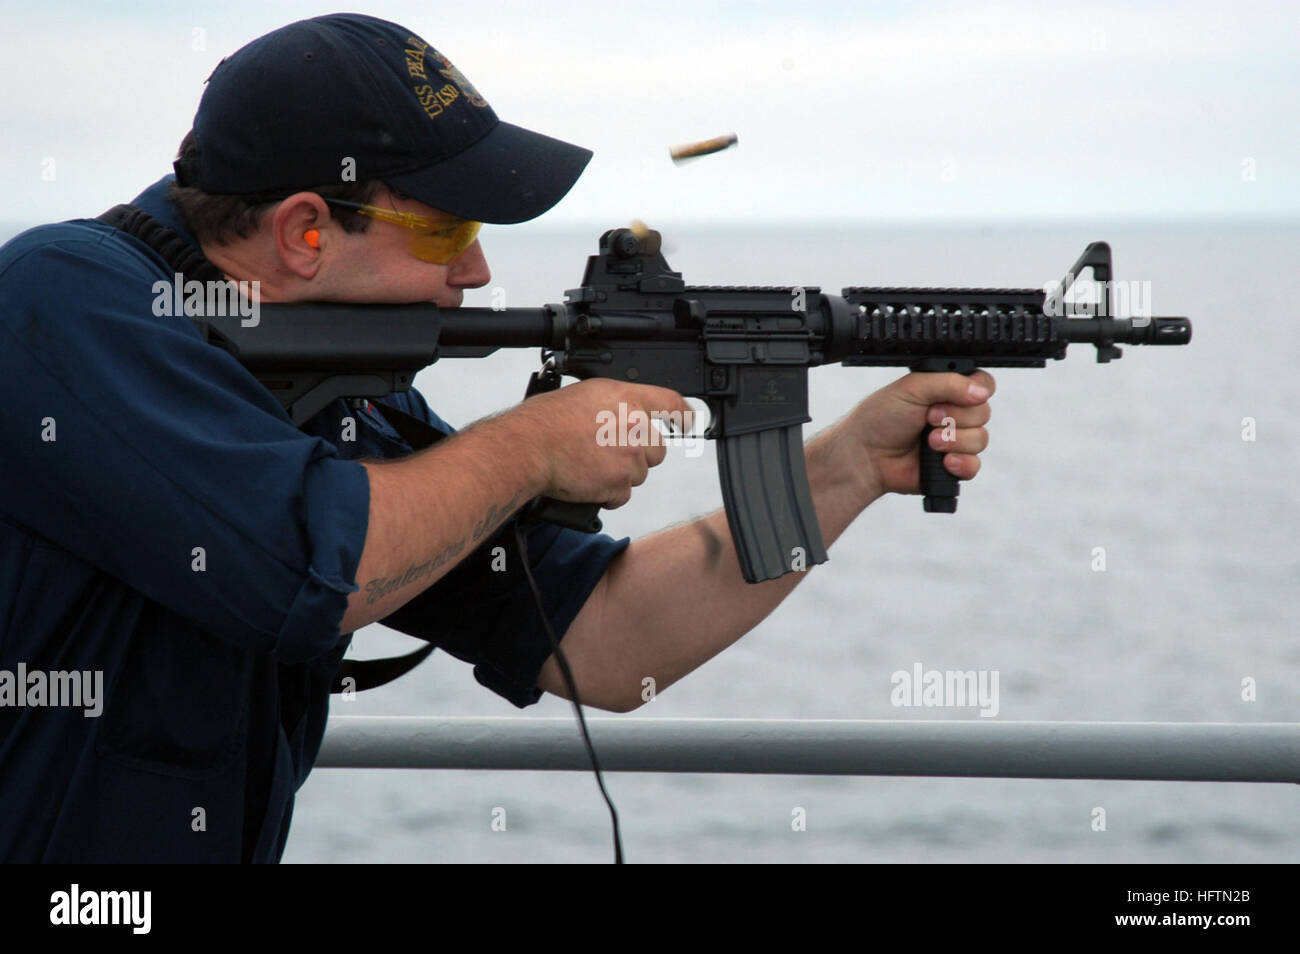 070501-N-7029R-035 ATLANTIC OCEAN (May 1, 2007) - GunnerÕs Mate 3rd Class Louie Mitts shoots an M-16 during a weapons exercise on board USS Pearl Harbor (LSD 52). Pearl Harbor is currently underway in support of Partnership of the Americas (POA) 2007. POA 2007 will focus on enhancing relationships with regional partner nations through a variety of exercises and events at sea and on shore throughout South America and the Caribbean. U.S. Navy photo by Mass Communication Specialist 2nd Class Alexia M. Riveracorrea (RELEASED) US Navy 070501-N-7029R-035 Gunner%%5Ersquo,s Mate 3rd Class Louie Mitts  Stock Photo